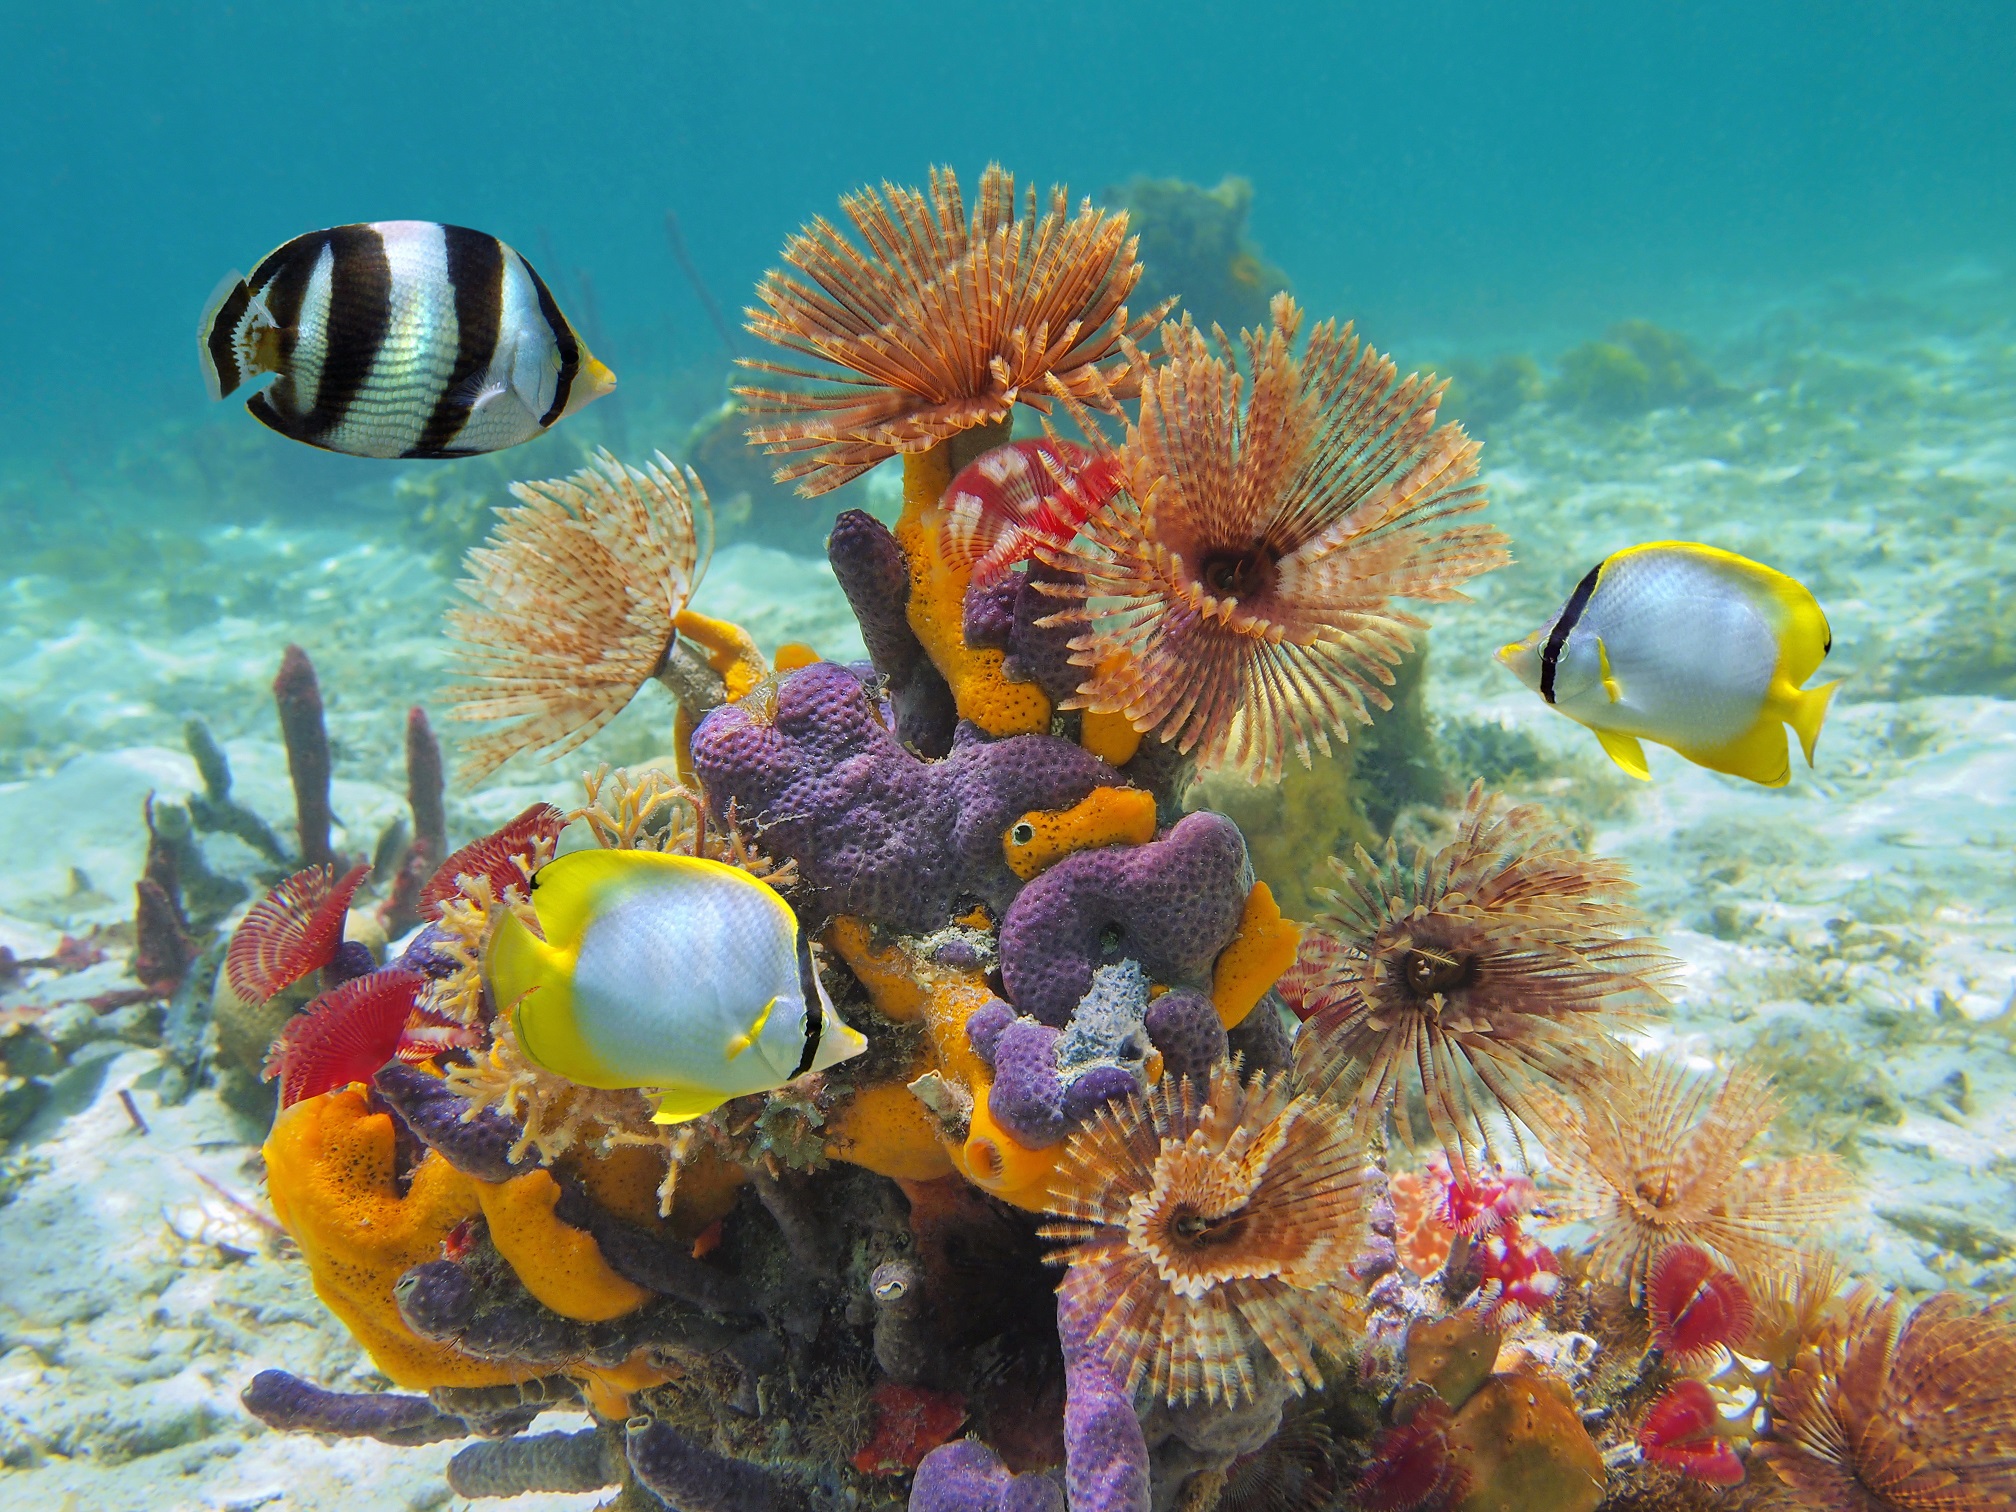 Colorful Caribbean sea life, fish and coral reef.